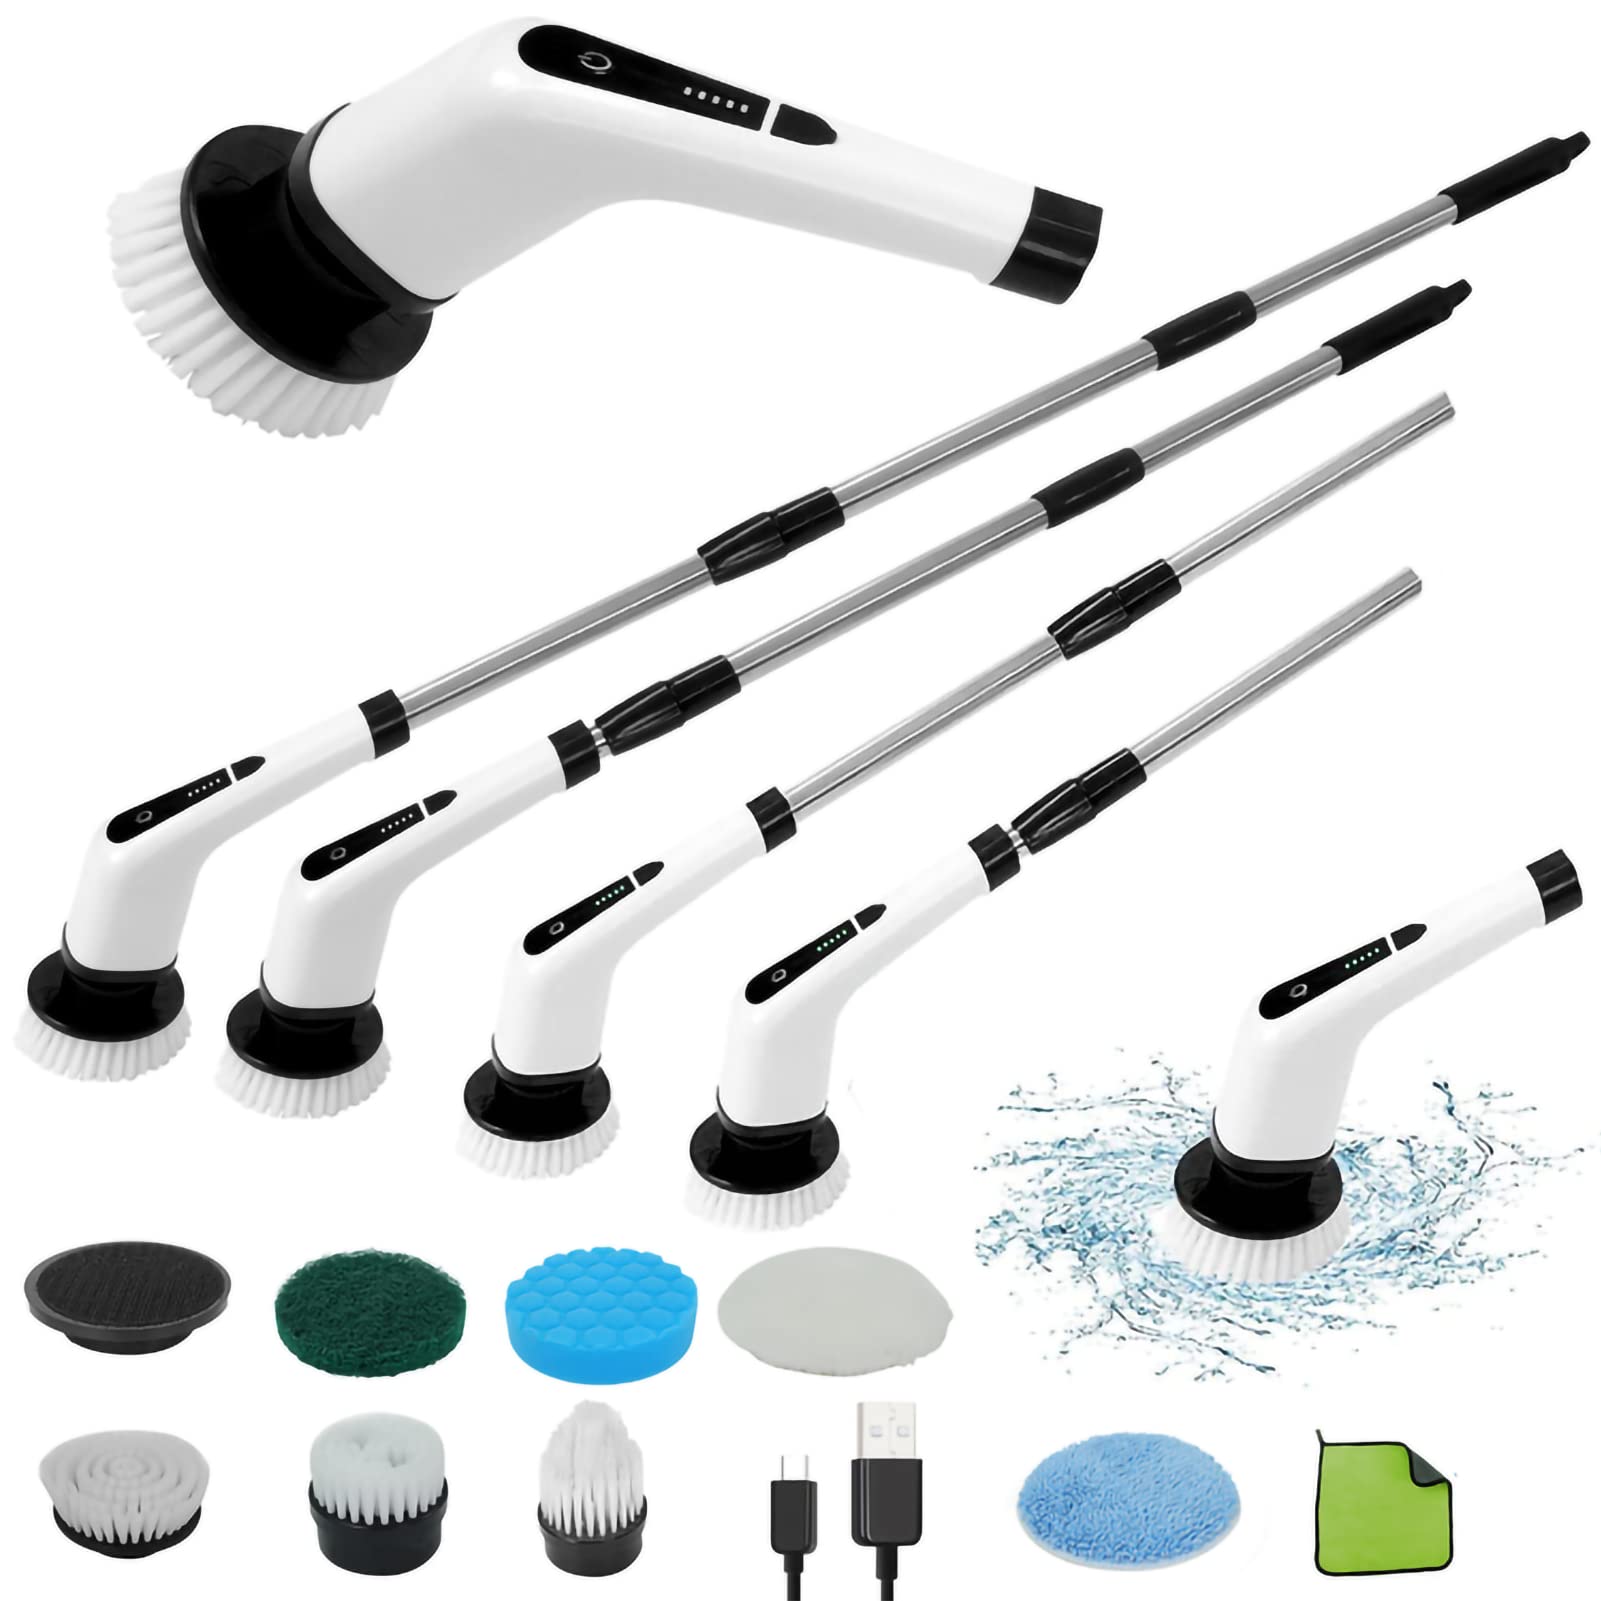 Electric Spin Scrubber, Cordless Bathroom Scrubber, Power Brush Floor Scrubber with Adjustable Handle, 7 Multi-Purpose Cleaning Brush Heads, for Bathtub,Tile, Shower, Window and Kitchen